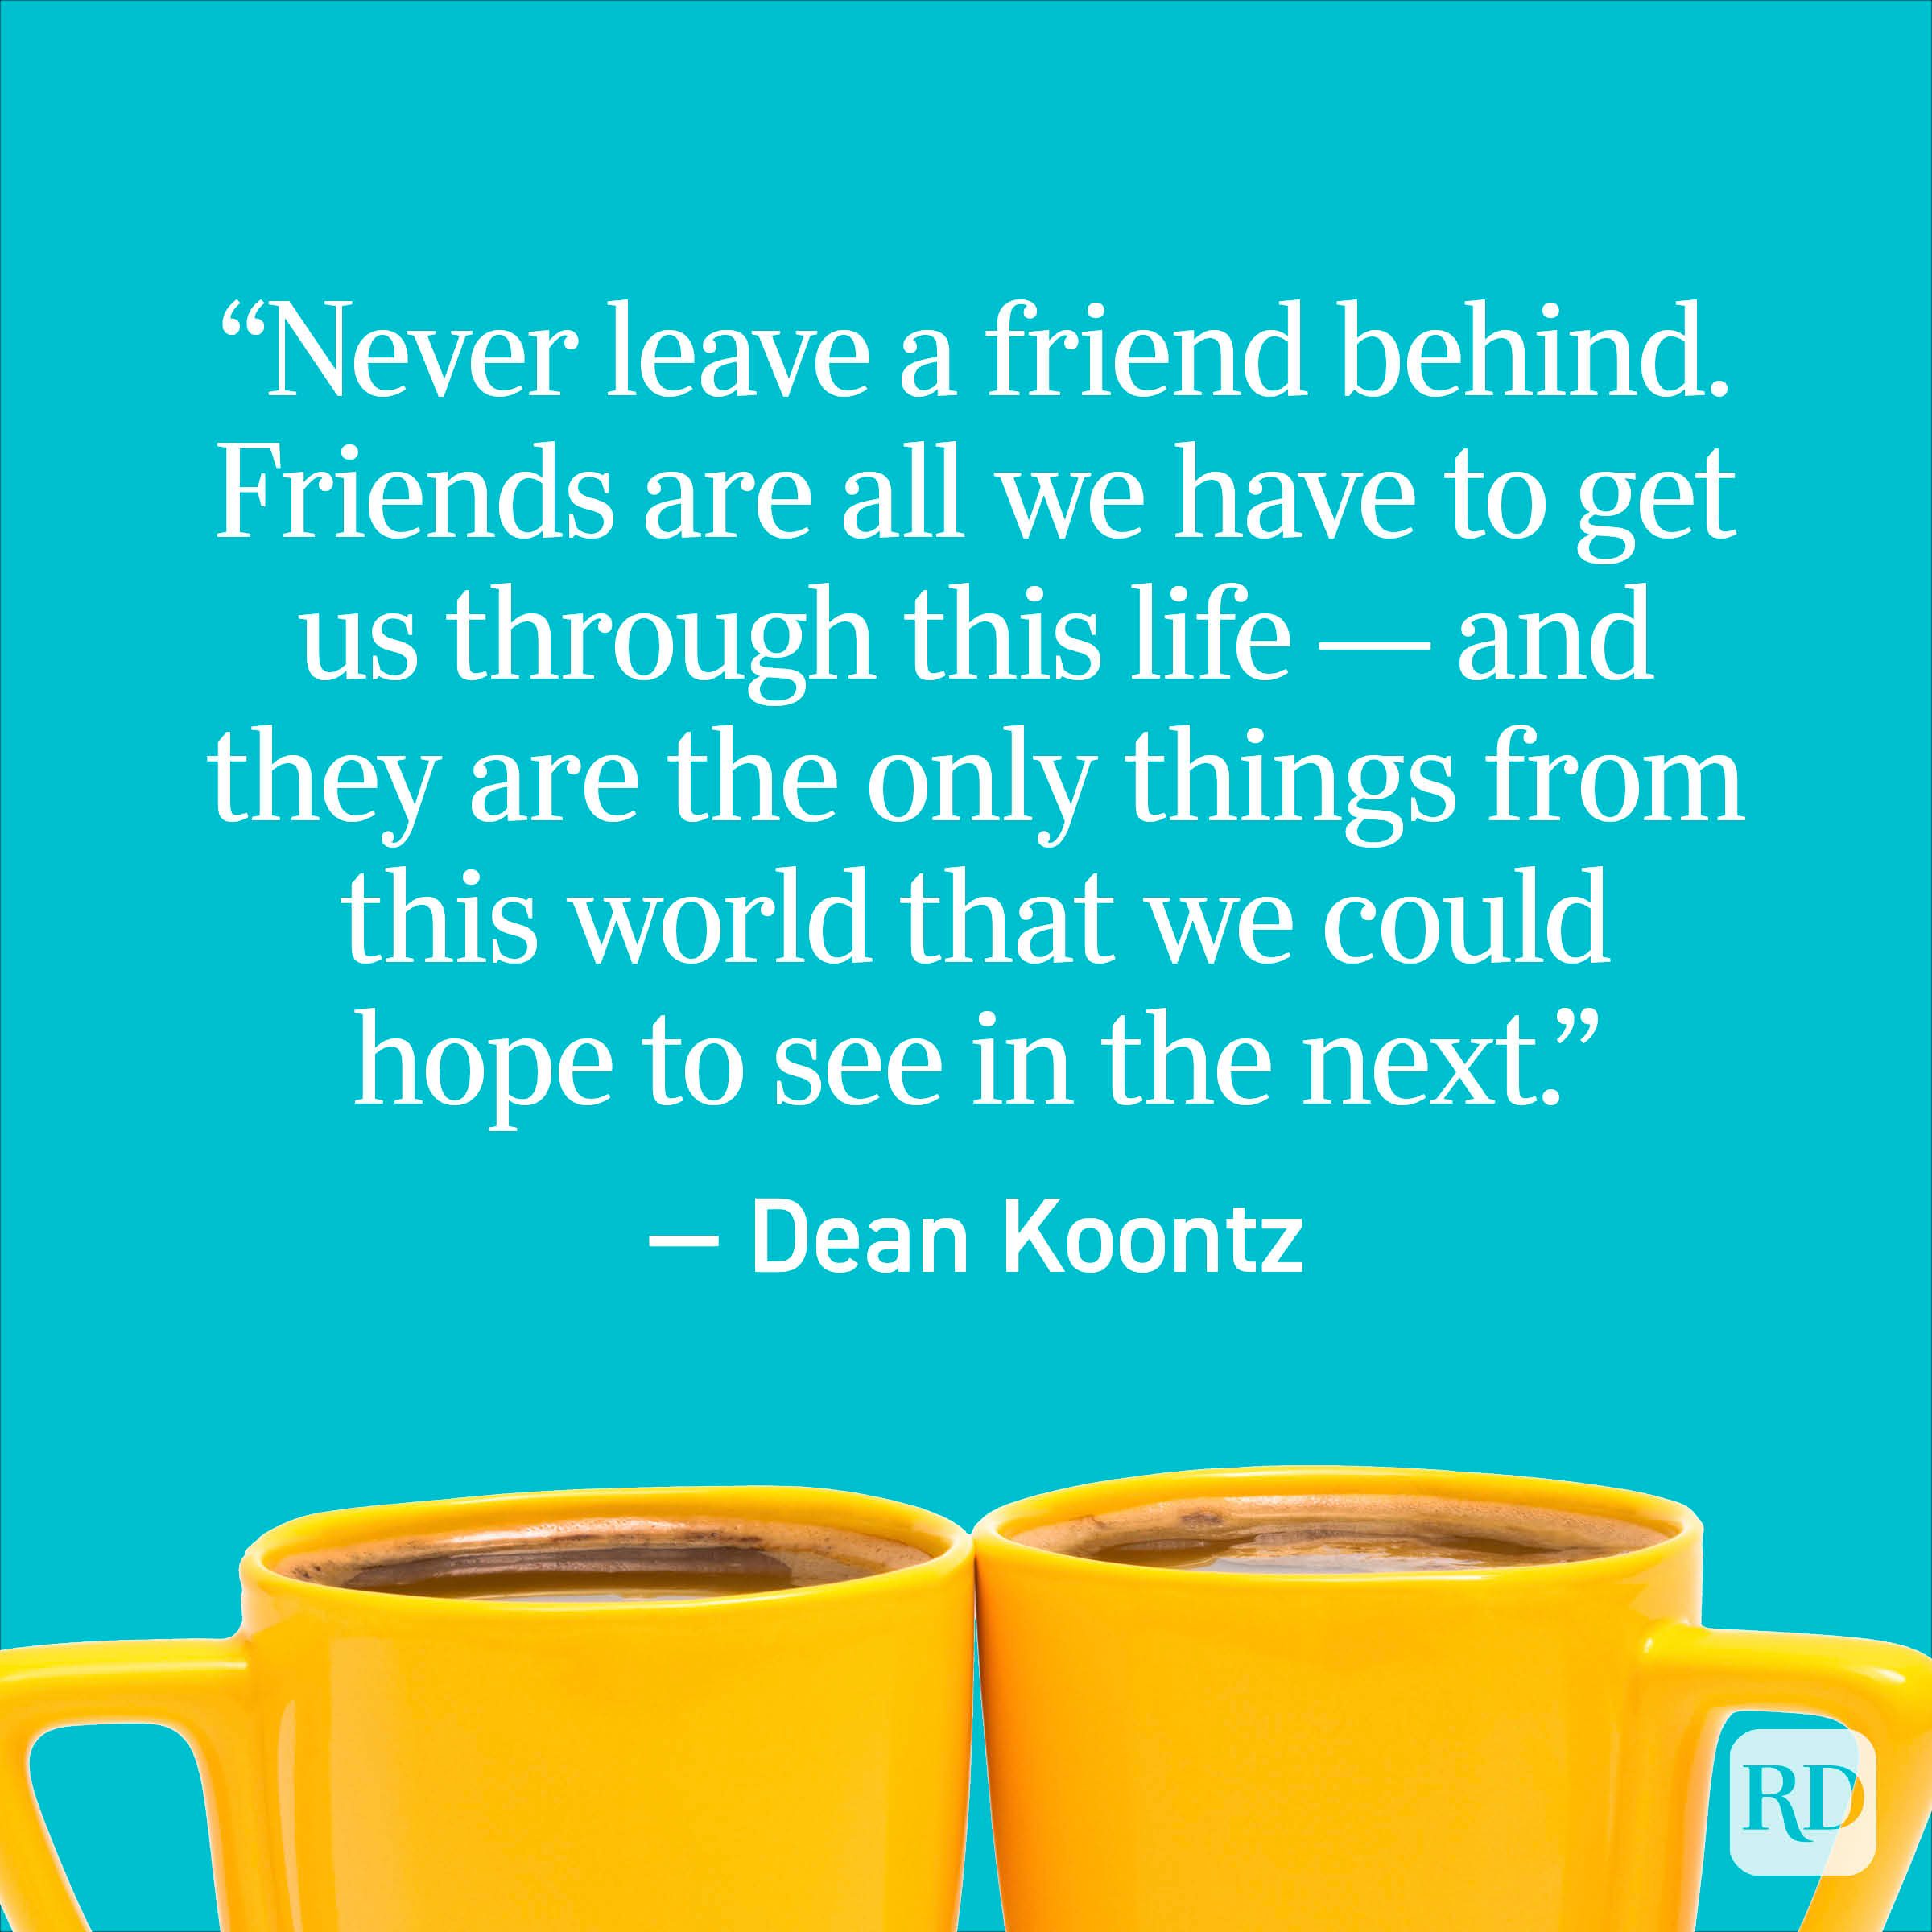 "Never leave a friend behind. Friends are all we have to get us through this life — and they are the only things from this world that we could hope to see in the next." - Dean Koontz